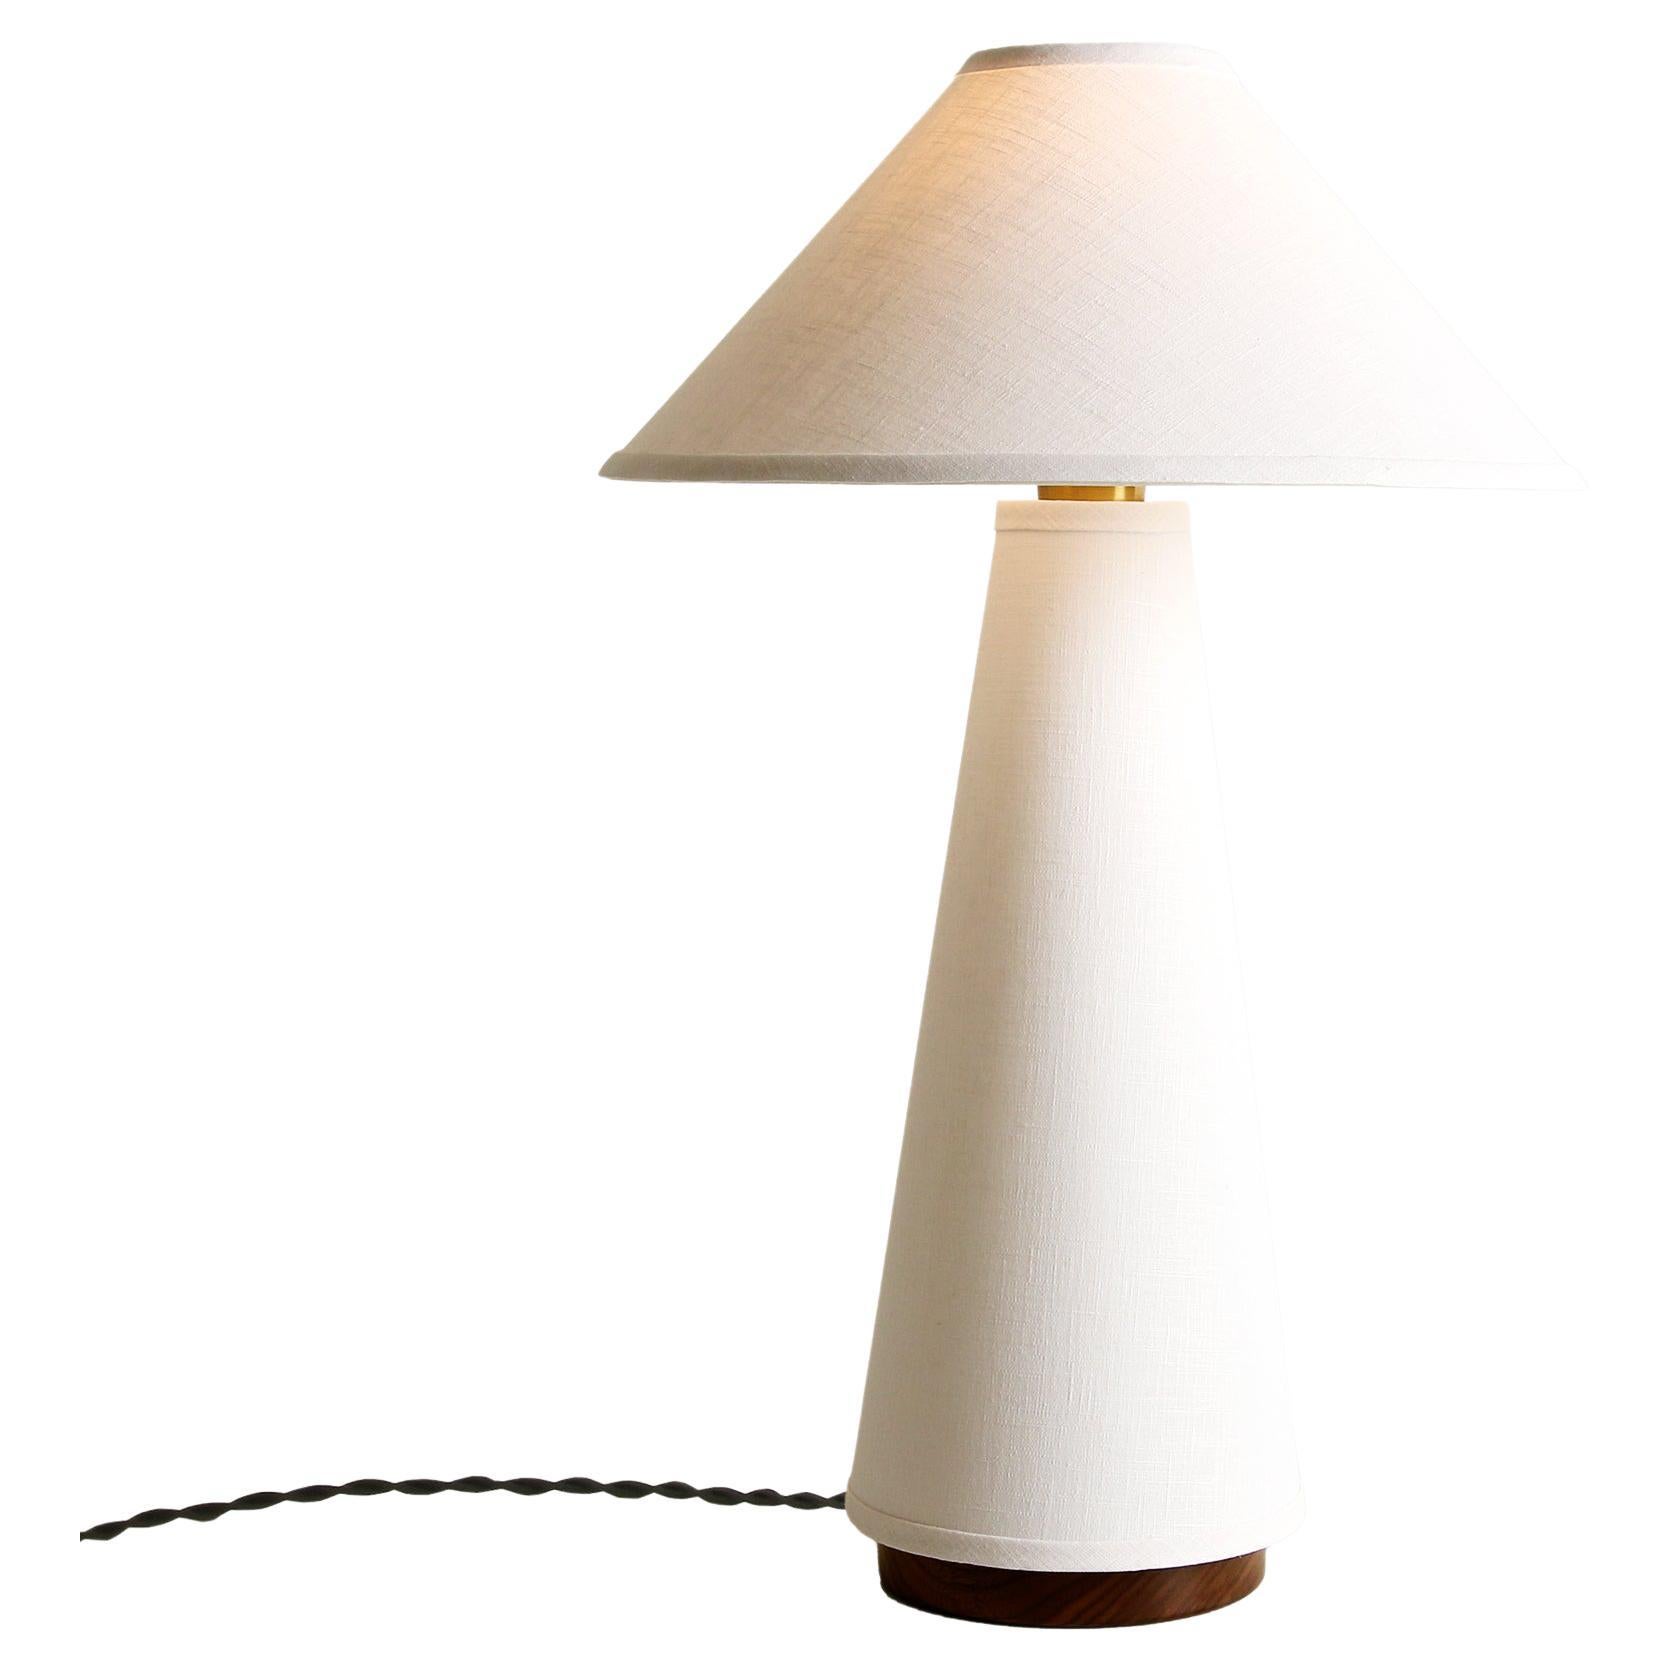 Linden Table Lamp, with Narrow Top Shade by Studio DUNN